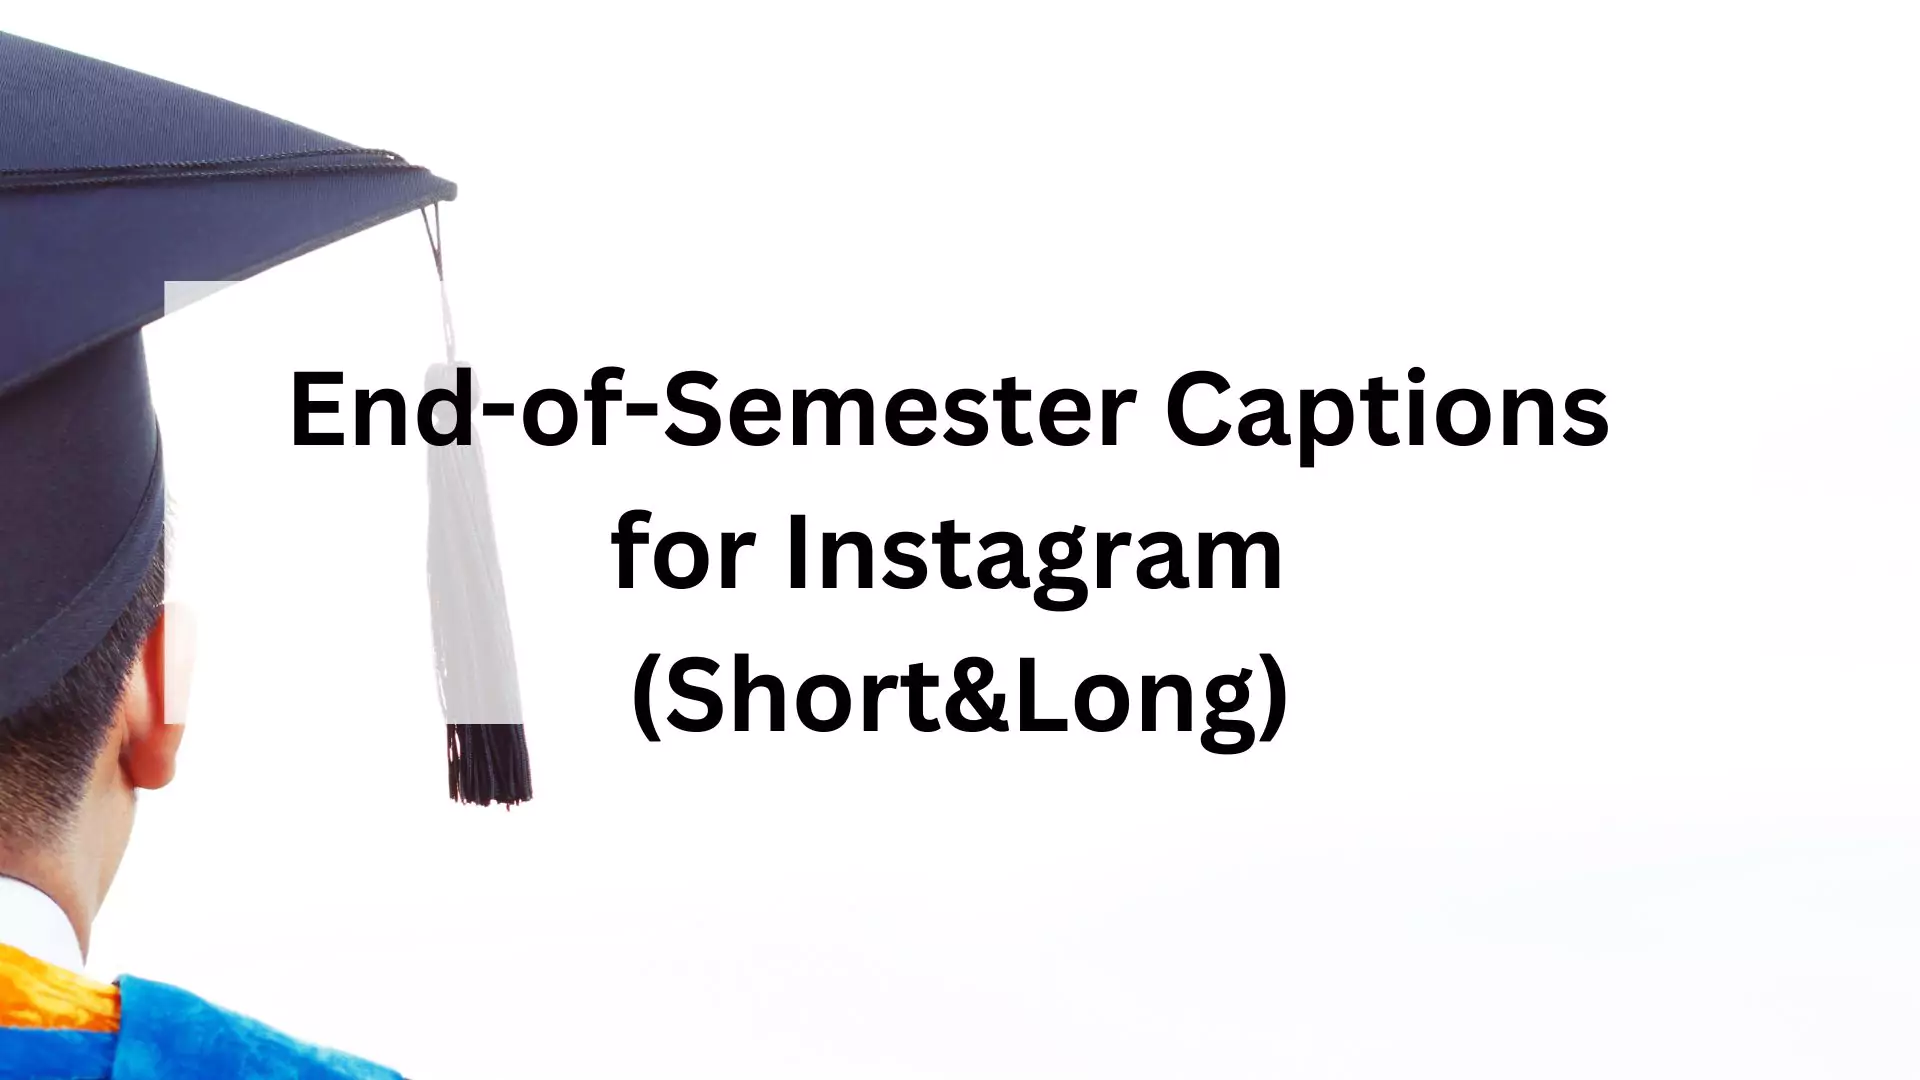 End-of-Semester Captions for Instagram